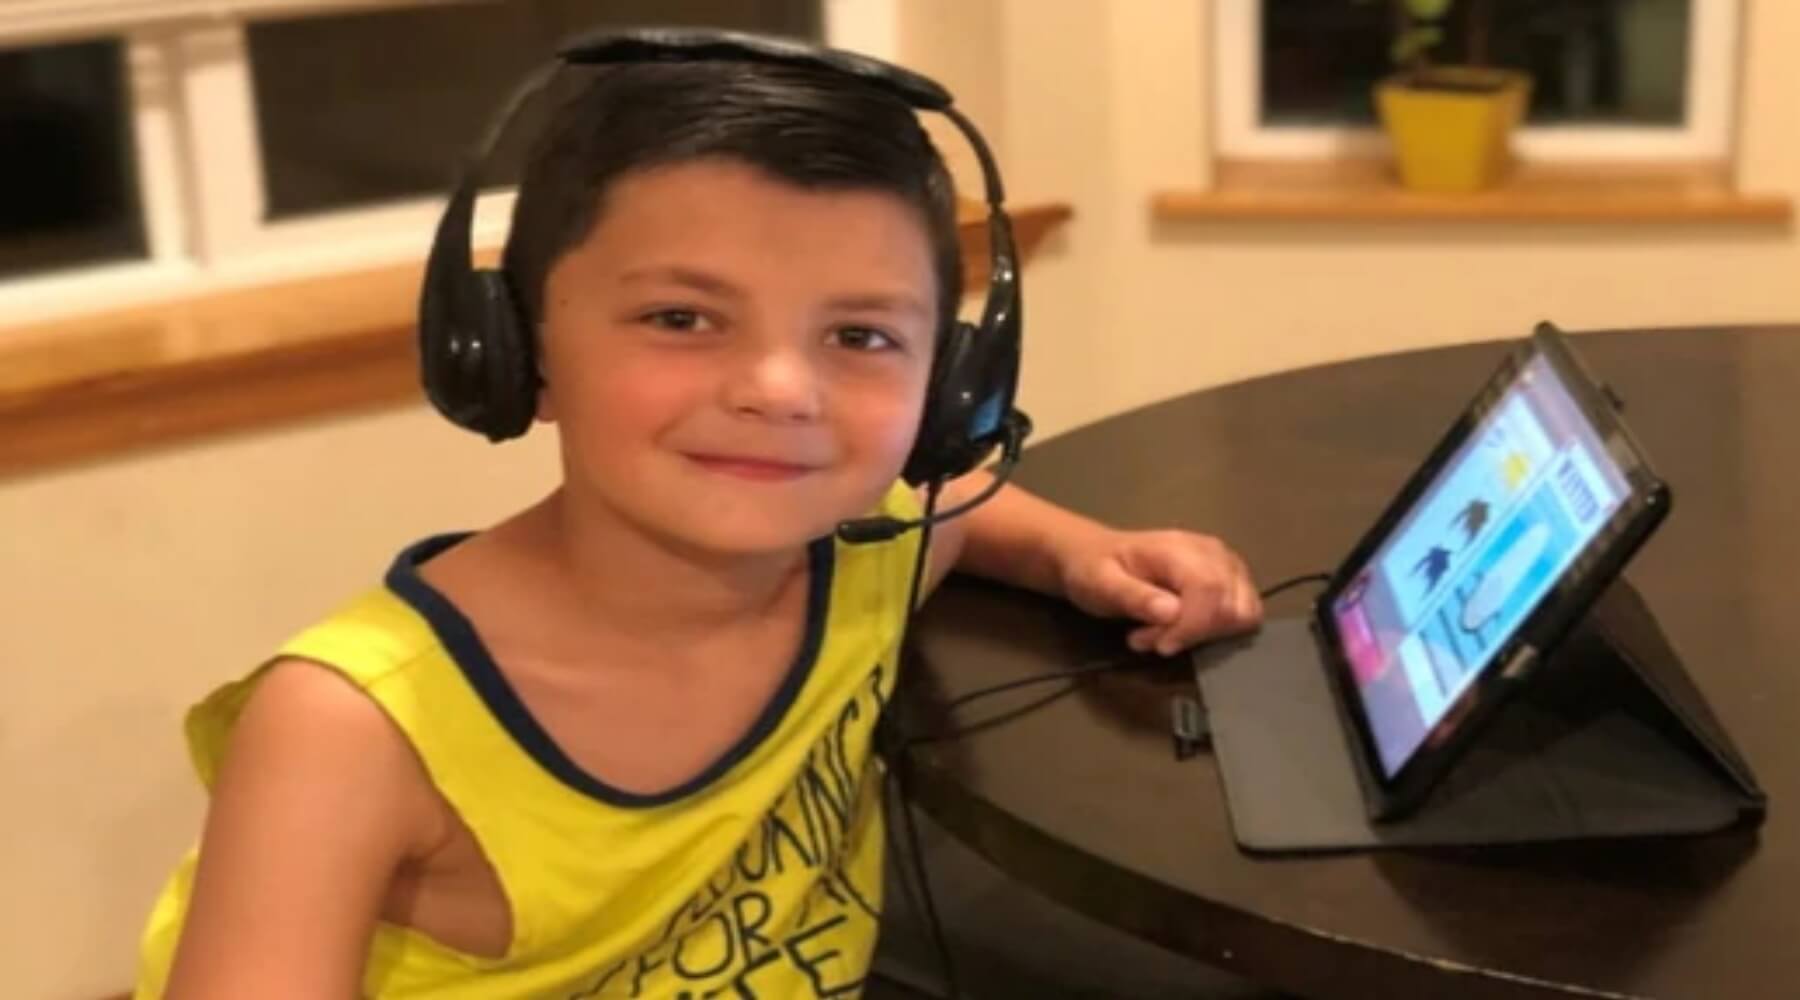 Making the most of your classroom experience starts with the right headphones. Our article discusses recent developments and features a list of top models on the market.